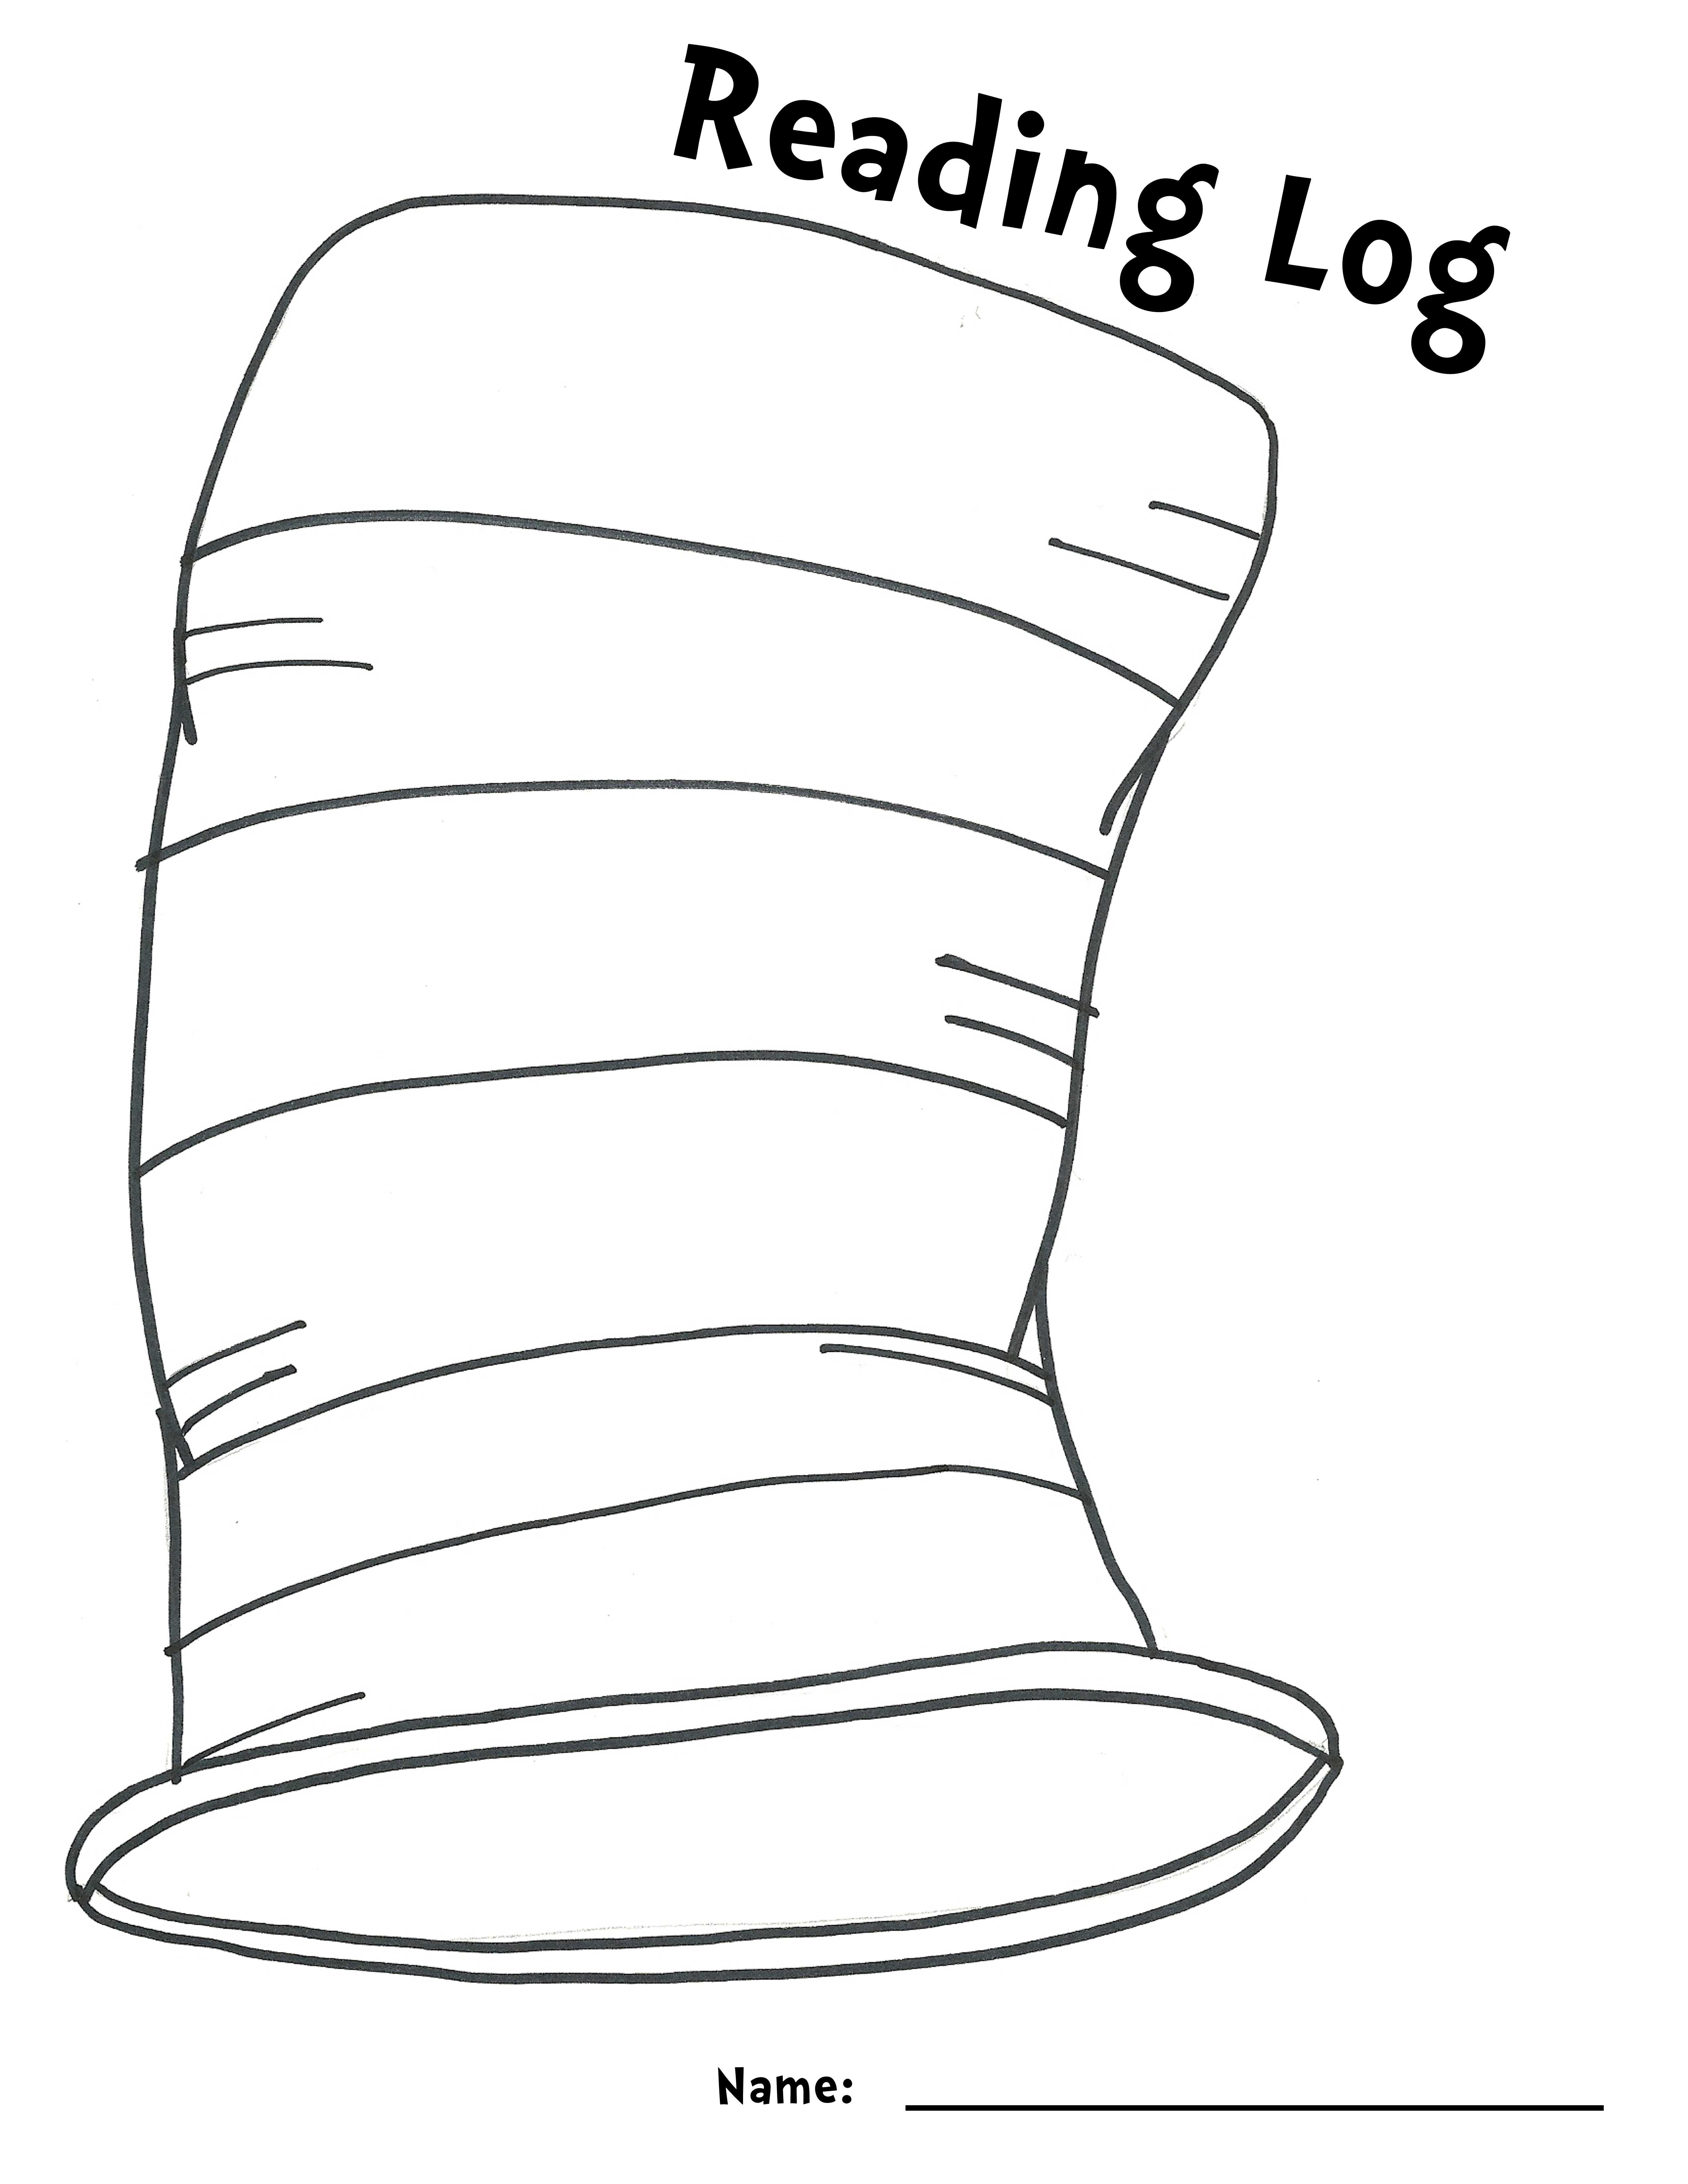 25 Images Of For Dr. Sue's Hat Template | Zeept Pertaining To Blank Cat In The Hat Template